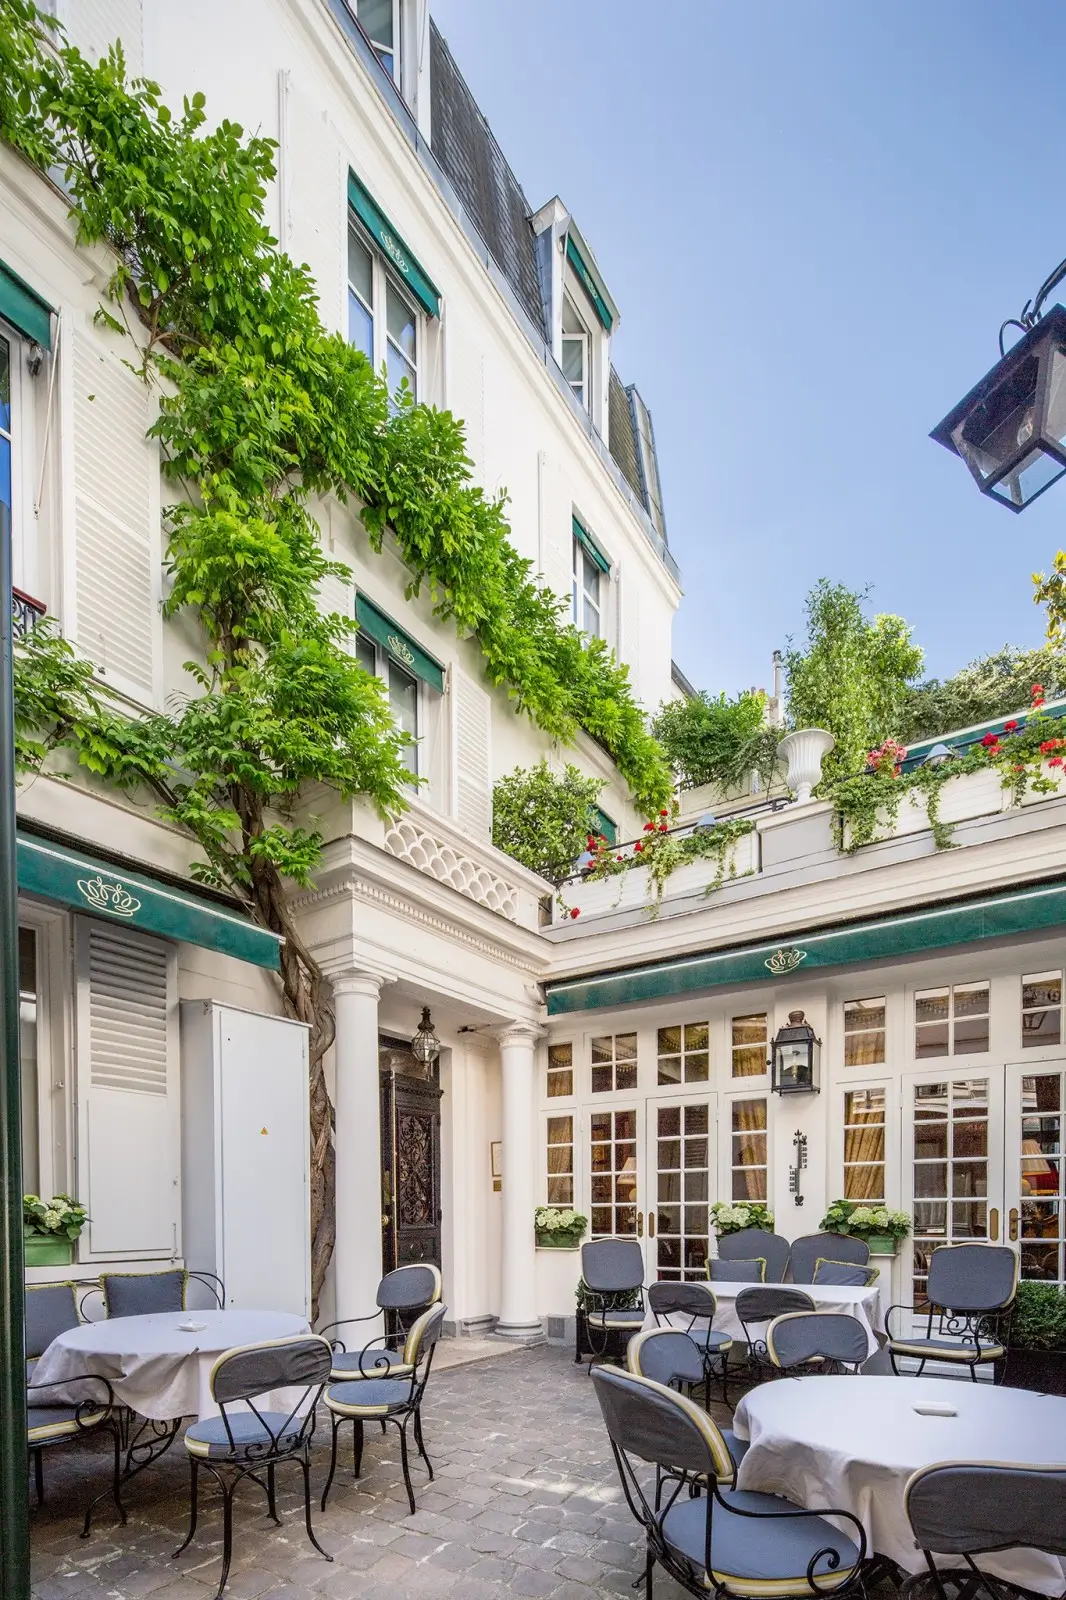 Quaint courtyard at Hotel Duc de Saint Simon in Paris, showcasing a sustainable hotel environment with ivy-clad walls, wrought iron furniture, and potted plants.